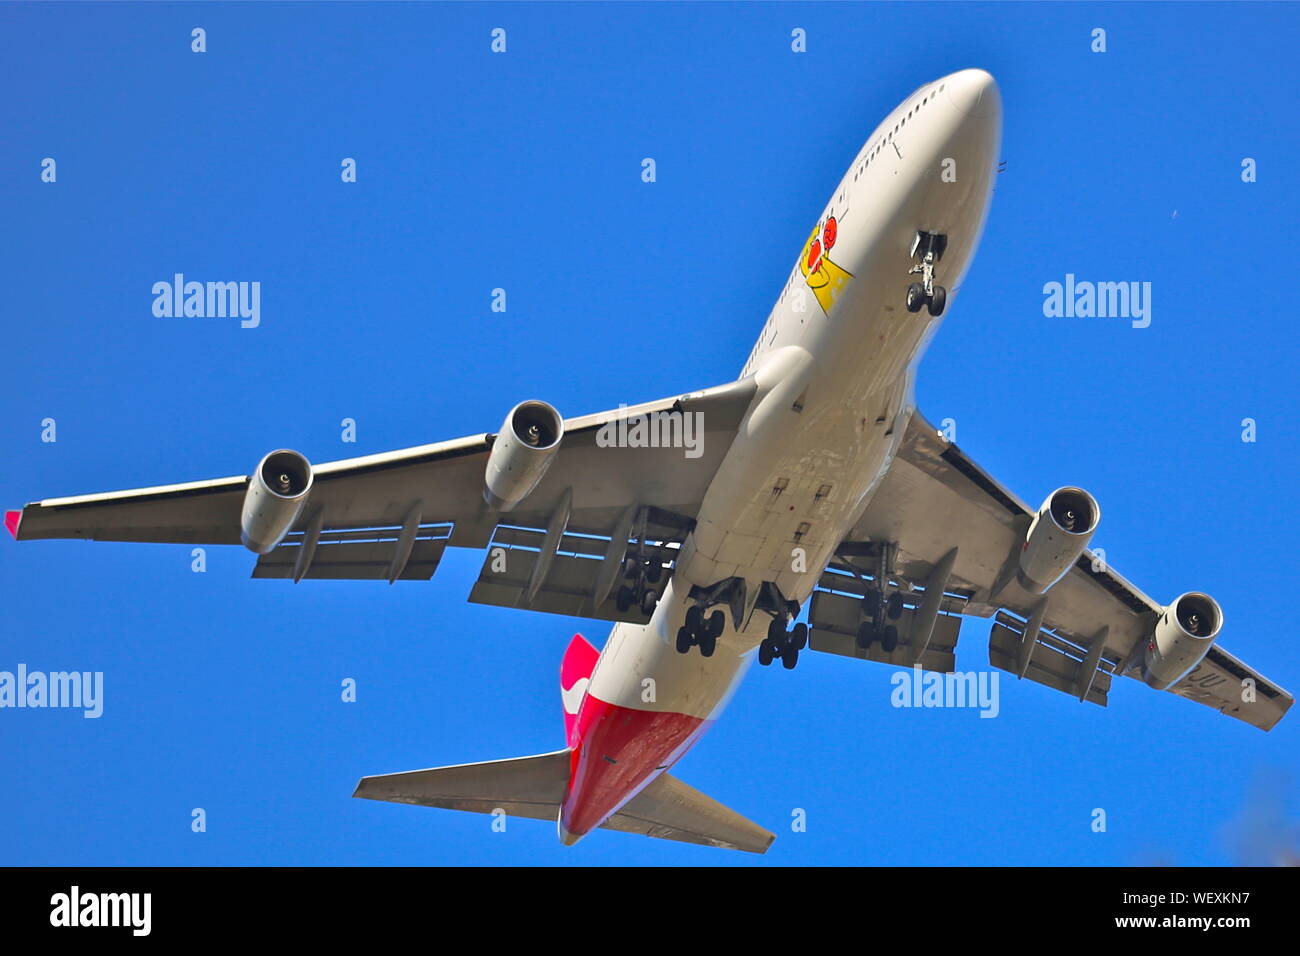 A Qantas Boeing 747 on final approach with wheels down and blue sky behind about to land in New York Stock Photo